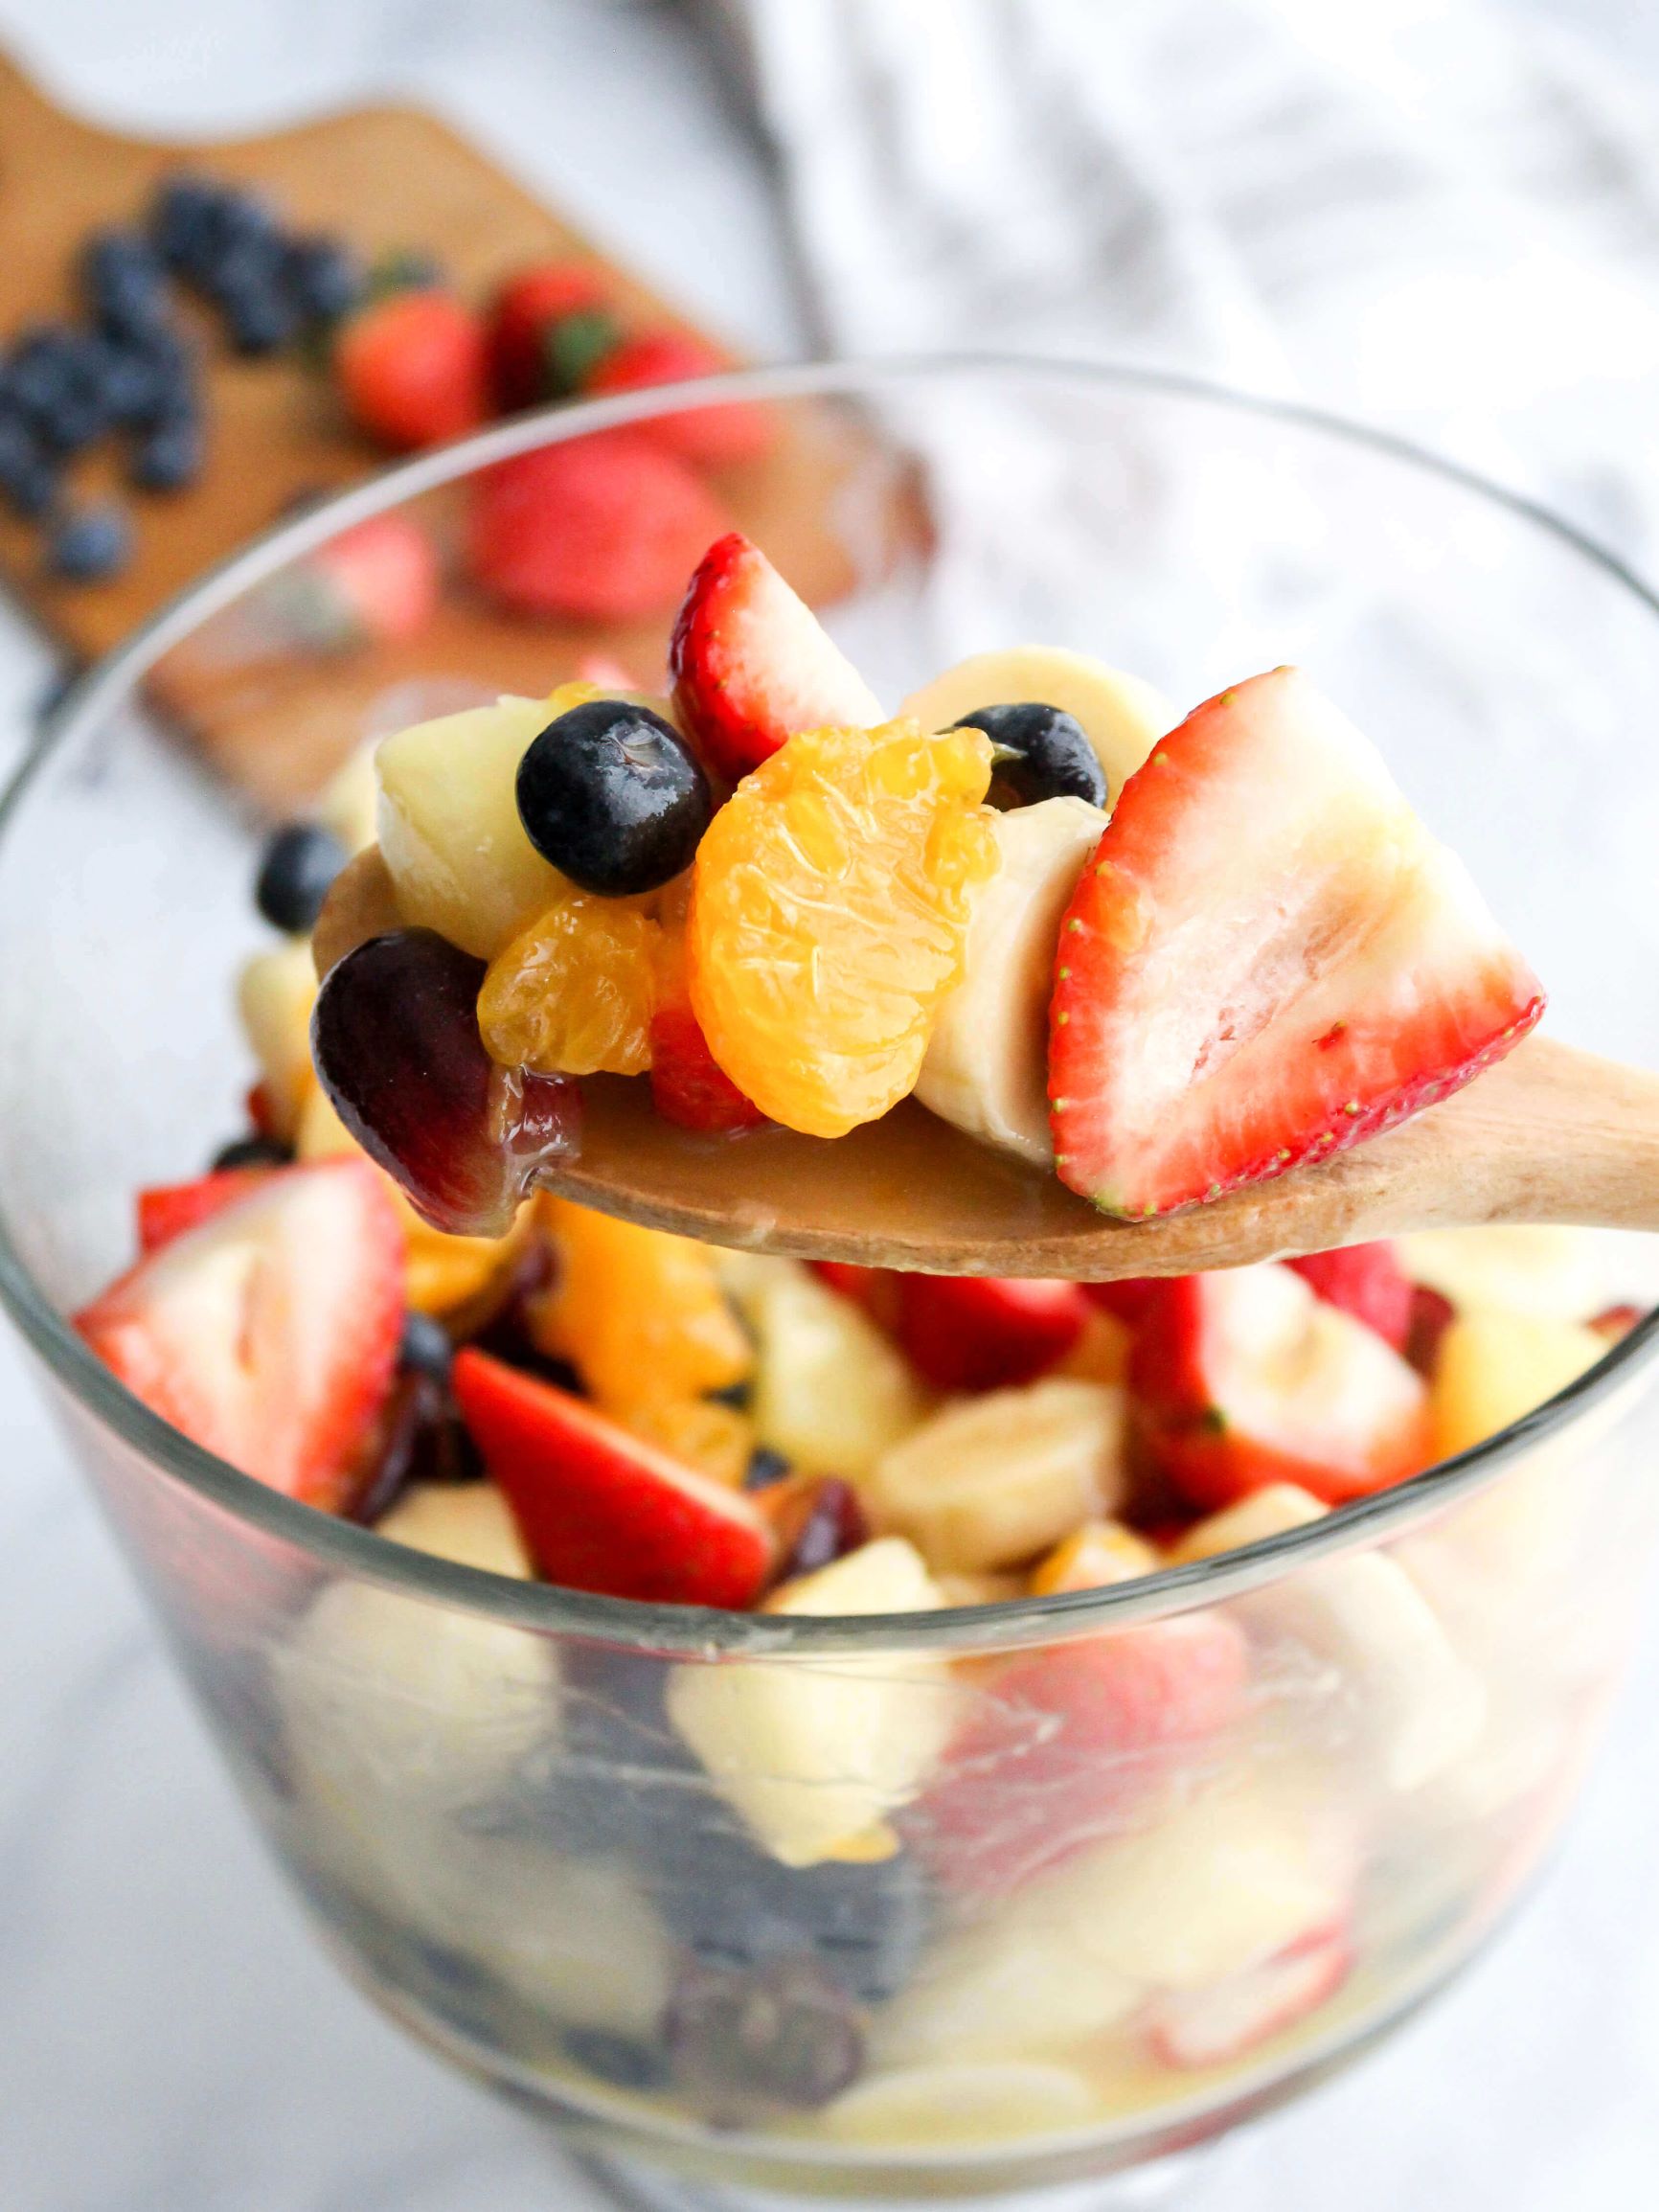 https://www.midwestlifeandstyle.com/wp-content/uploads/2021/01/Simple-and-Classic-Fruit-Salad-10-Midwest-Life-and-Style-Blog.jpg